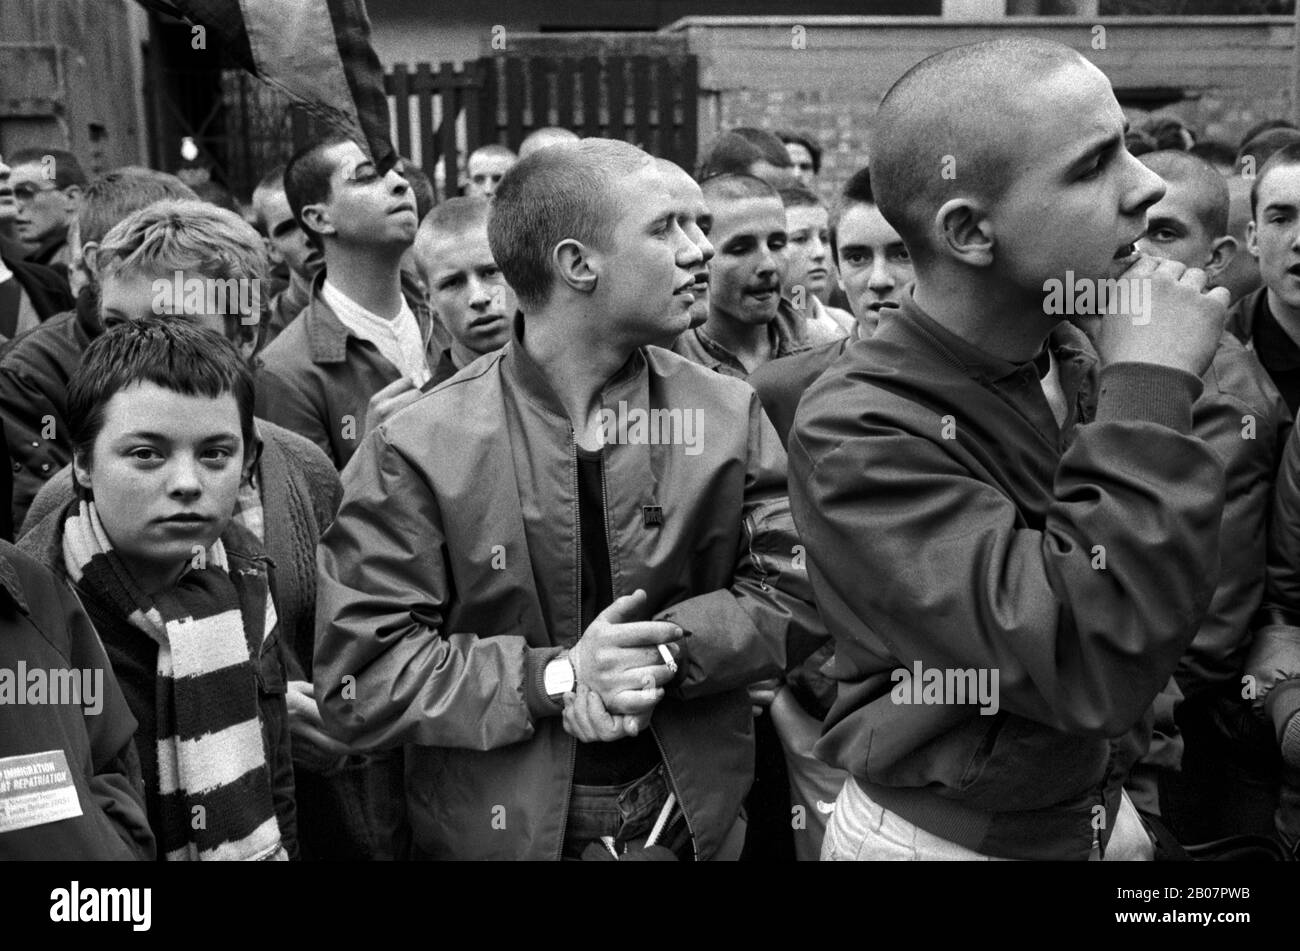 Skinhead teenagers 1980s fashion looking tough wearing Bomber Jackets London 1980  Group of teen Skinheads all dressed in the same style. UK Southwark, South London England circa 1980. HOMER SYKES Stock Photo